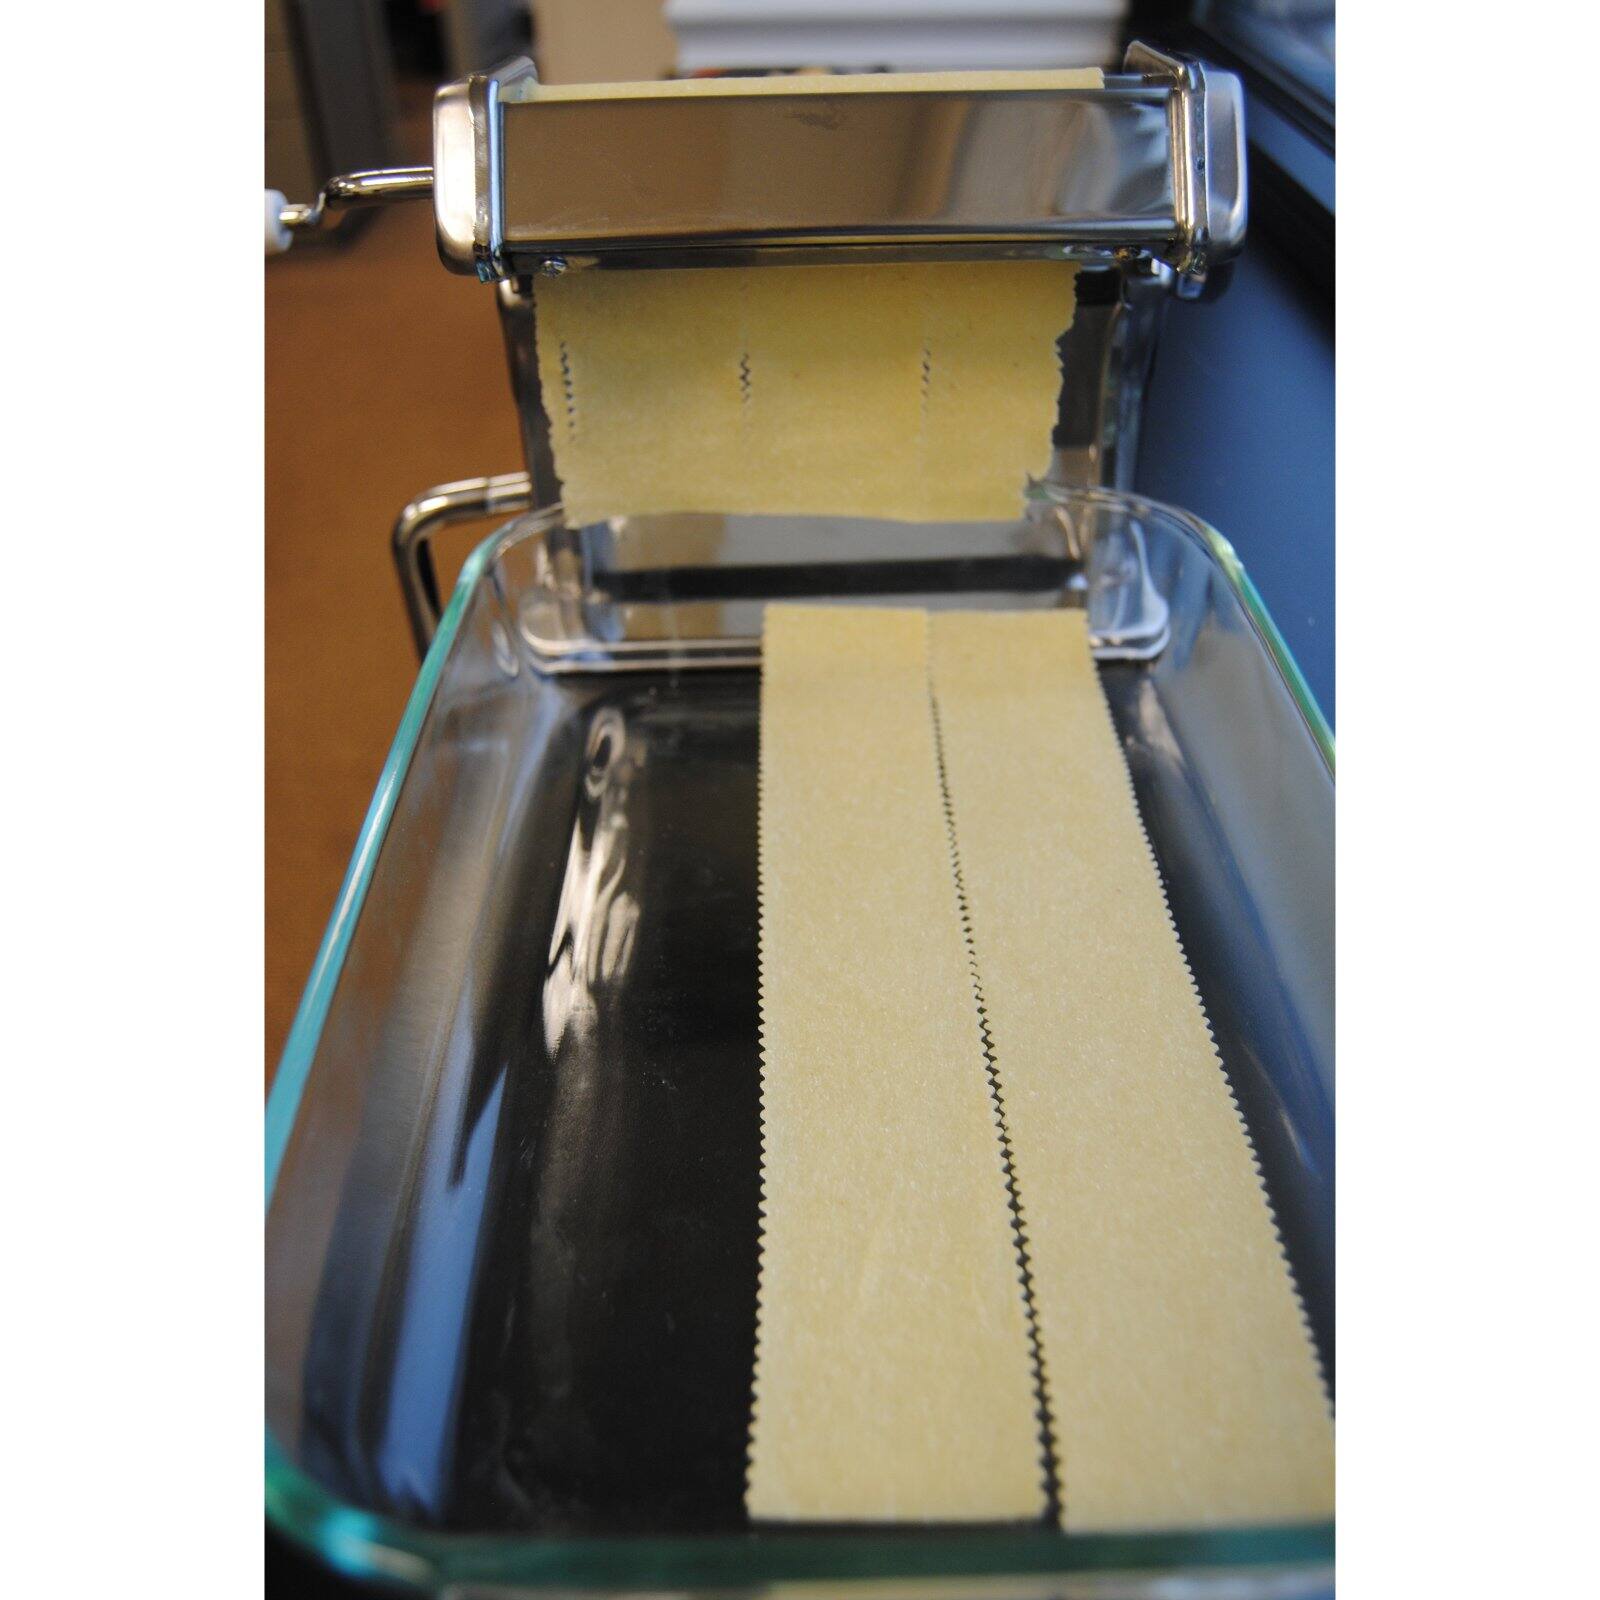 Weston 6 Inch Traditional Style 6" Traditional Pasta Machine - image 4 of 5